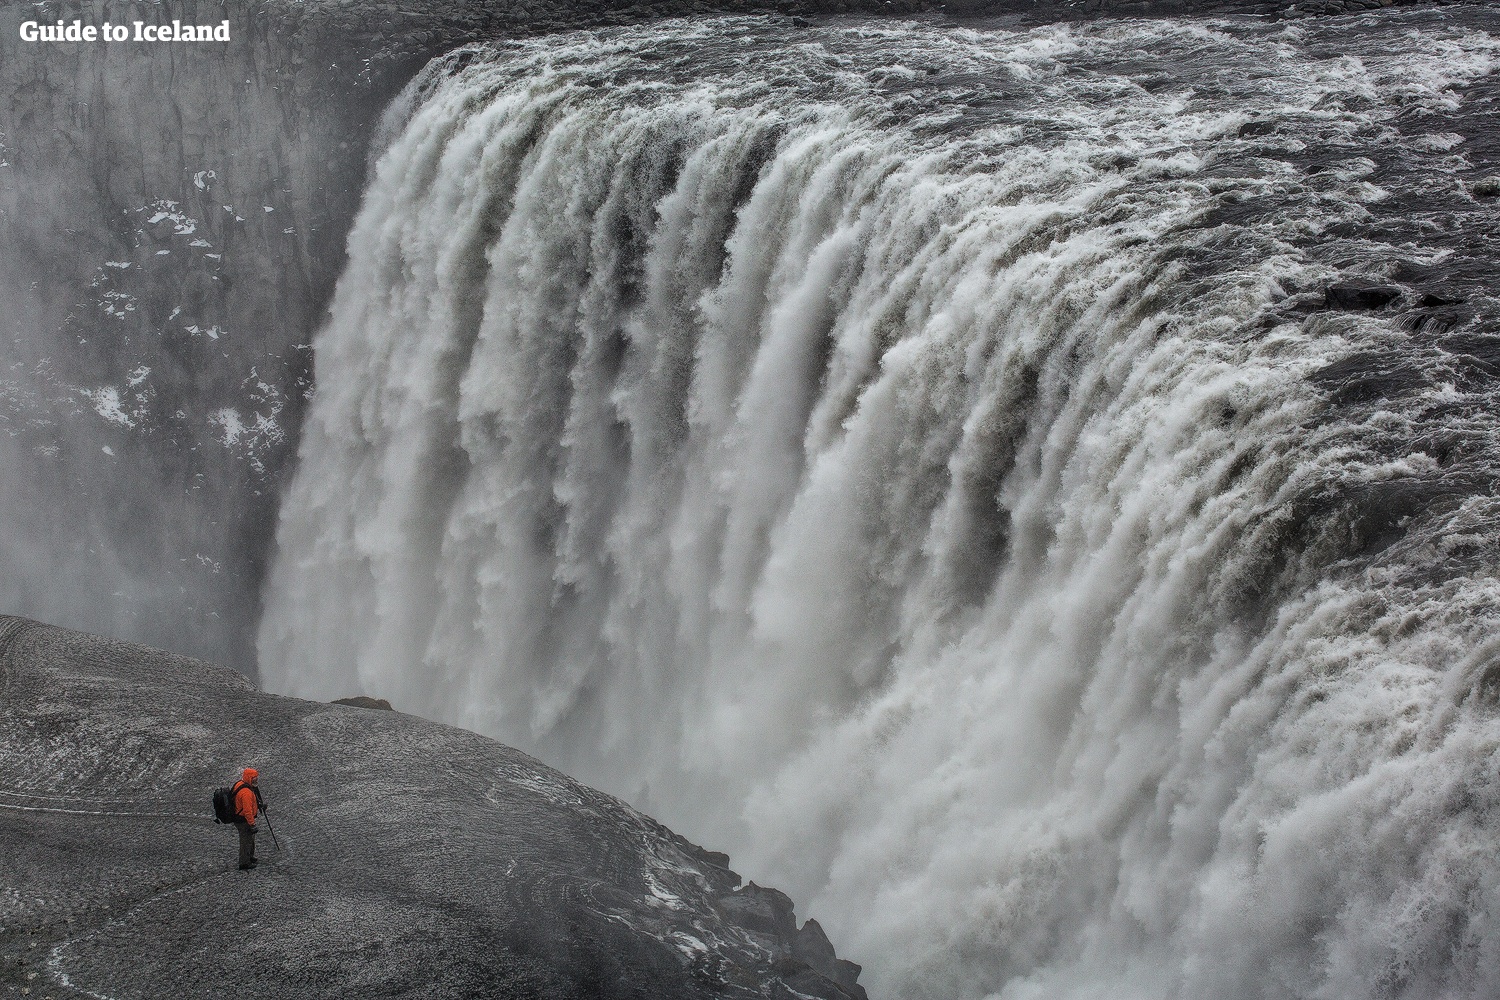 The magnificent Dettifoss waterfall in North Iceland.